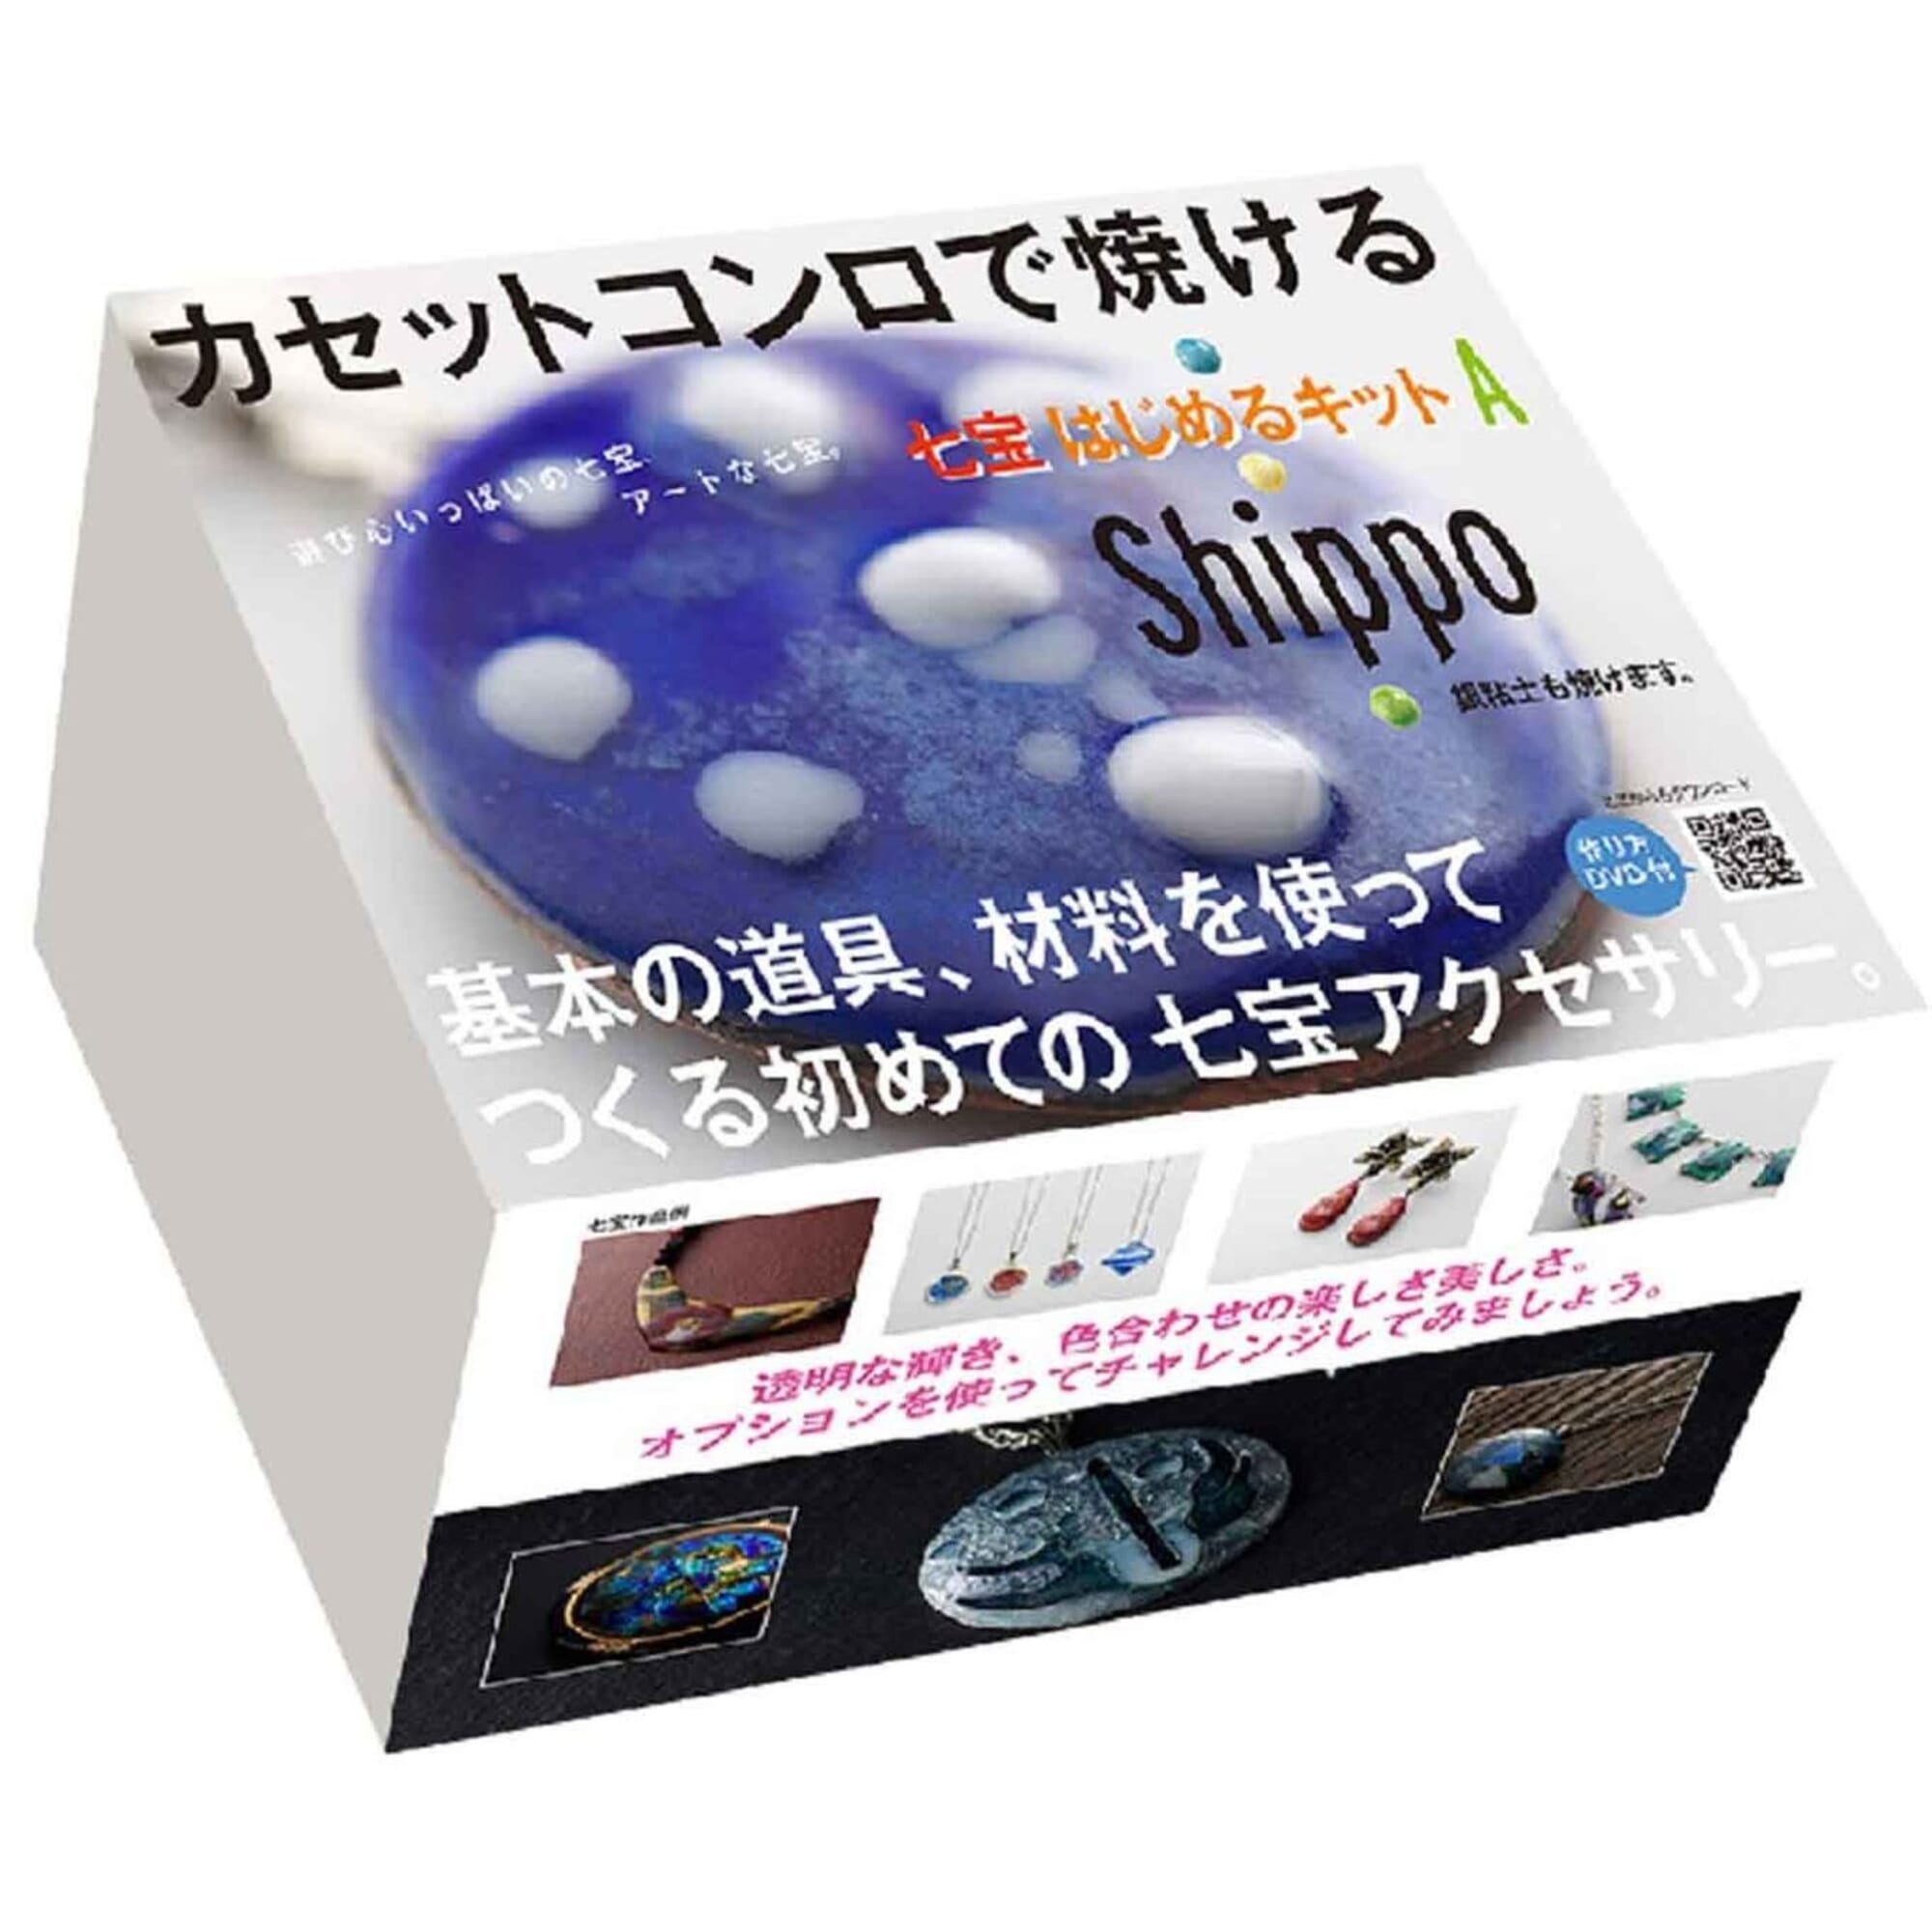 Nitto Gakku Japanese 18-Piece Shippo Cloisonne Enamel Jewellery Craft  Starter Kit Set A, with Instruction Book & DVD, for Jewelry Making